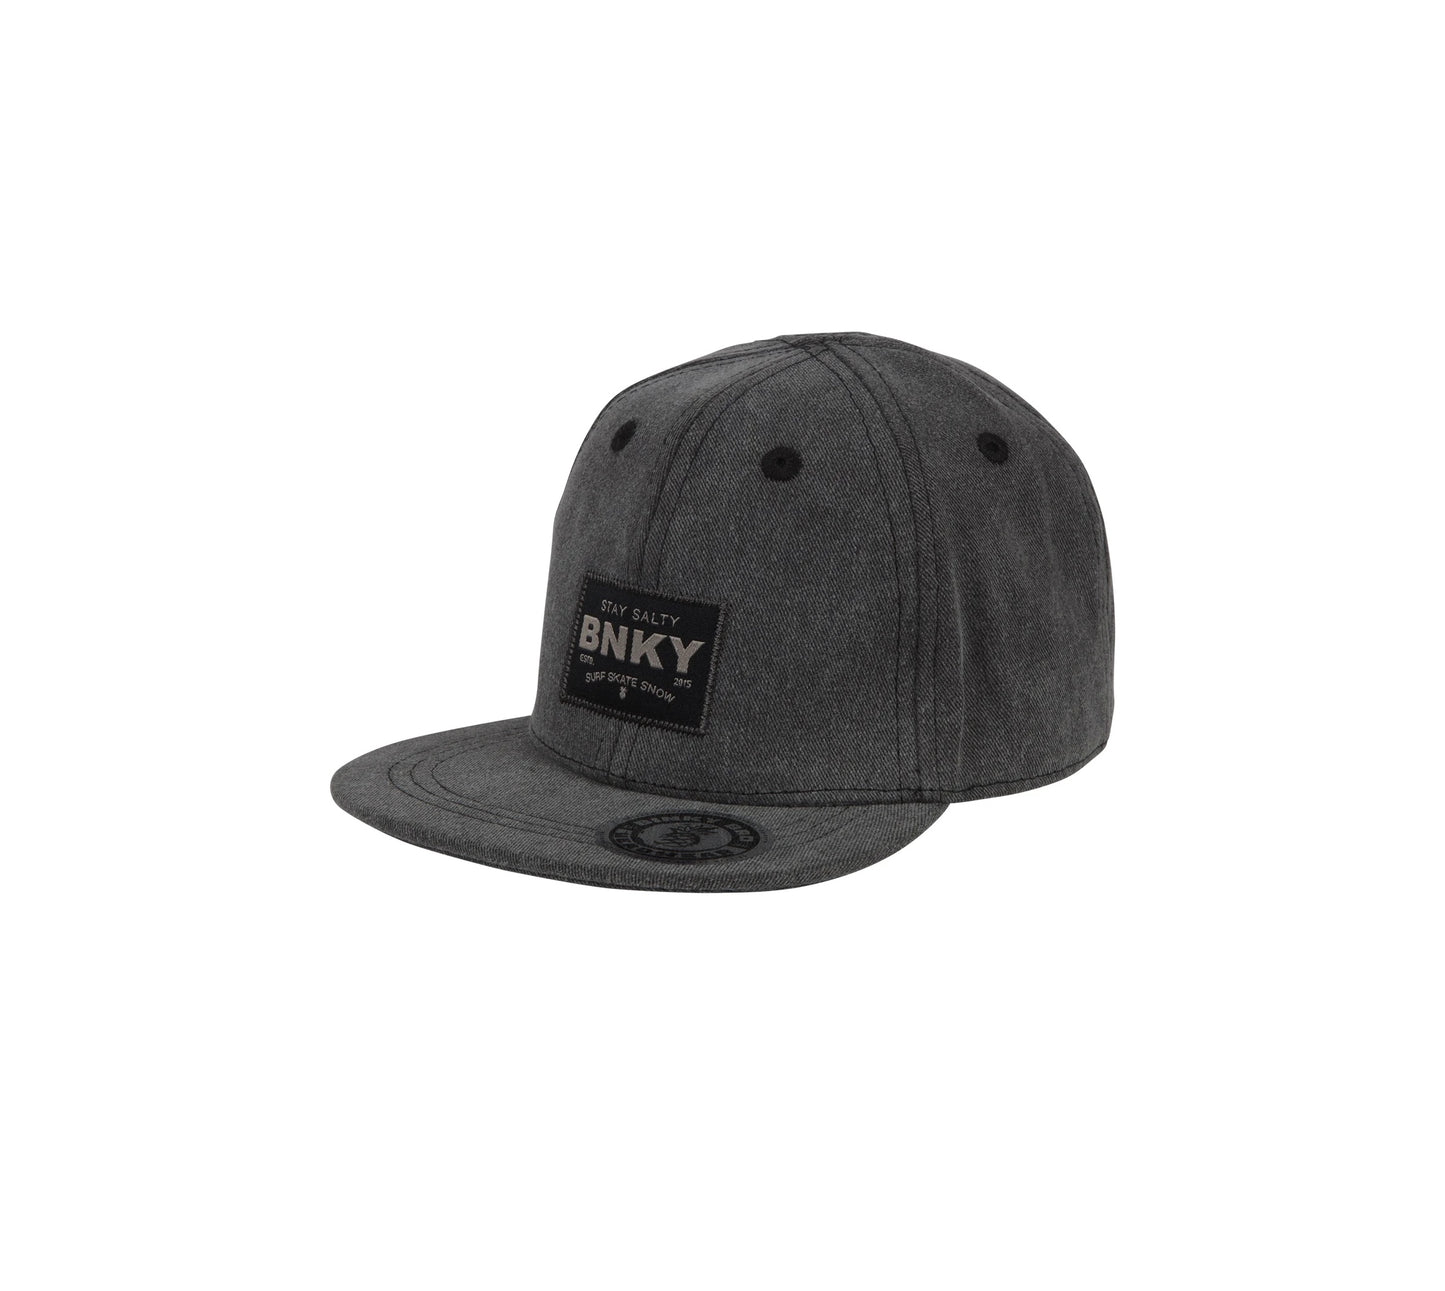 Torrey Pines Hat: Infant (4 months - 12 months) / charcoal / Standard Fit